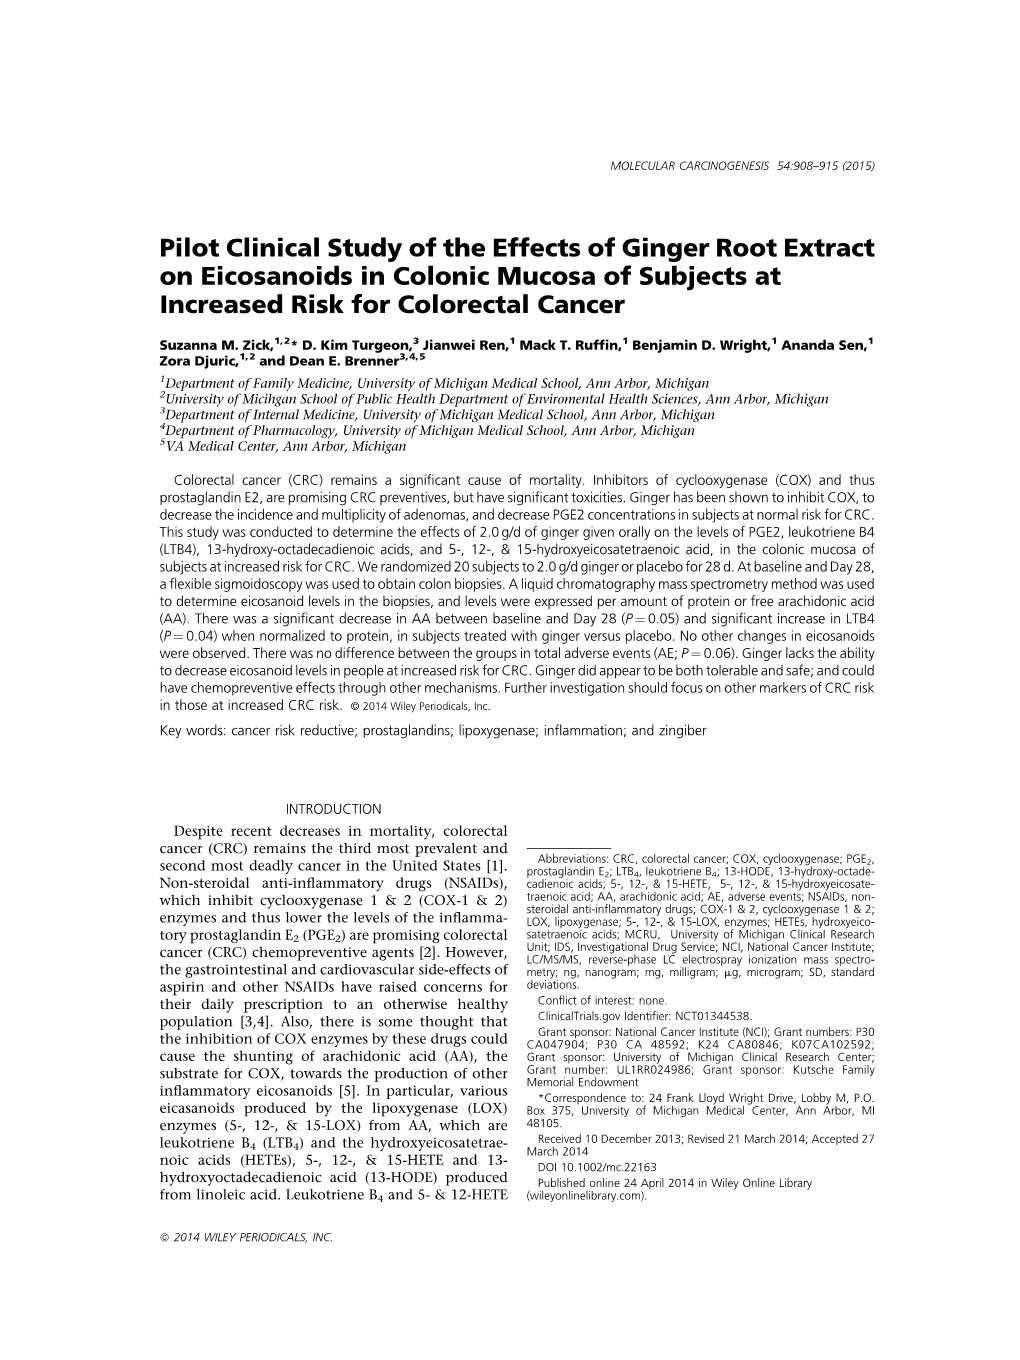 Pilot Clinical Study of the Effects of Ginger Root Extract on Eicosanoids in Colonic Mucosa of Subjects at Increased Risk for Colorectal Cancer